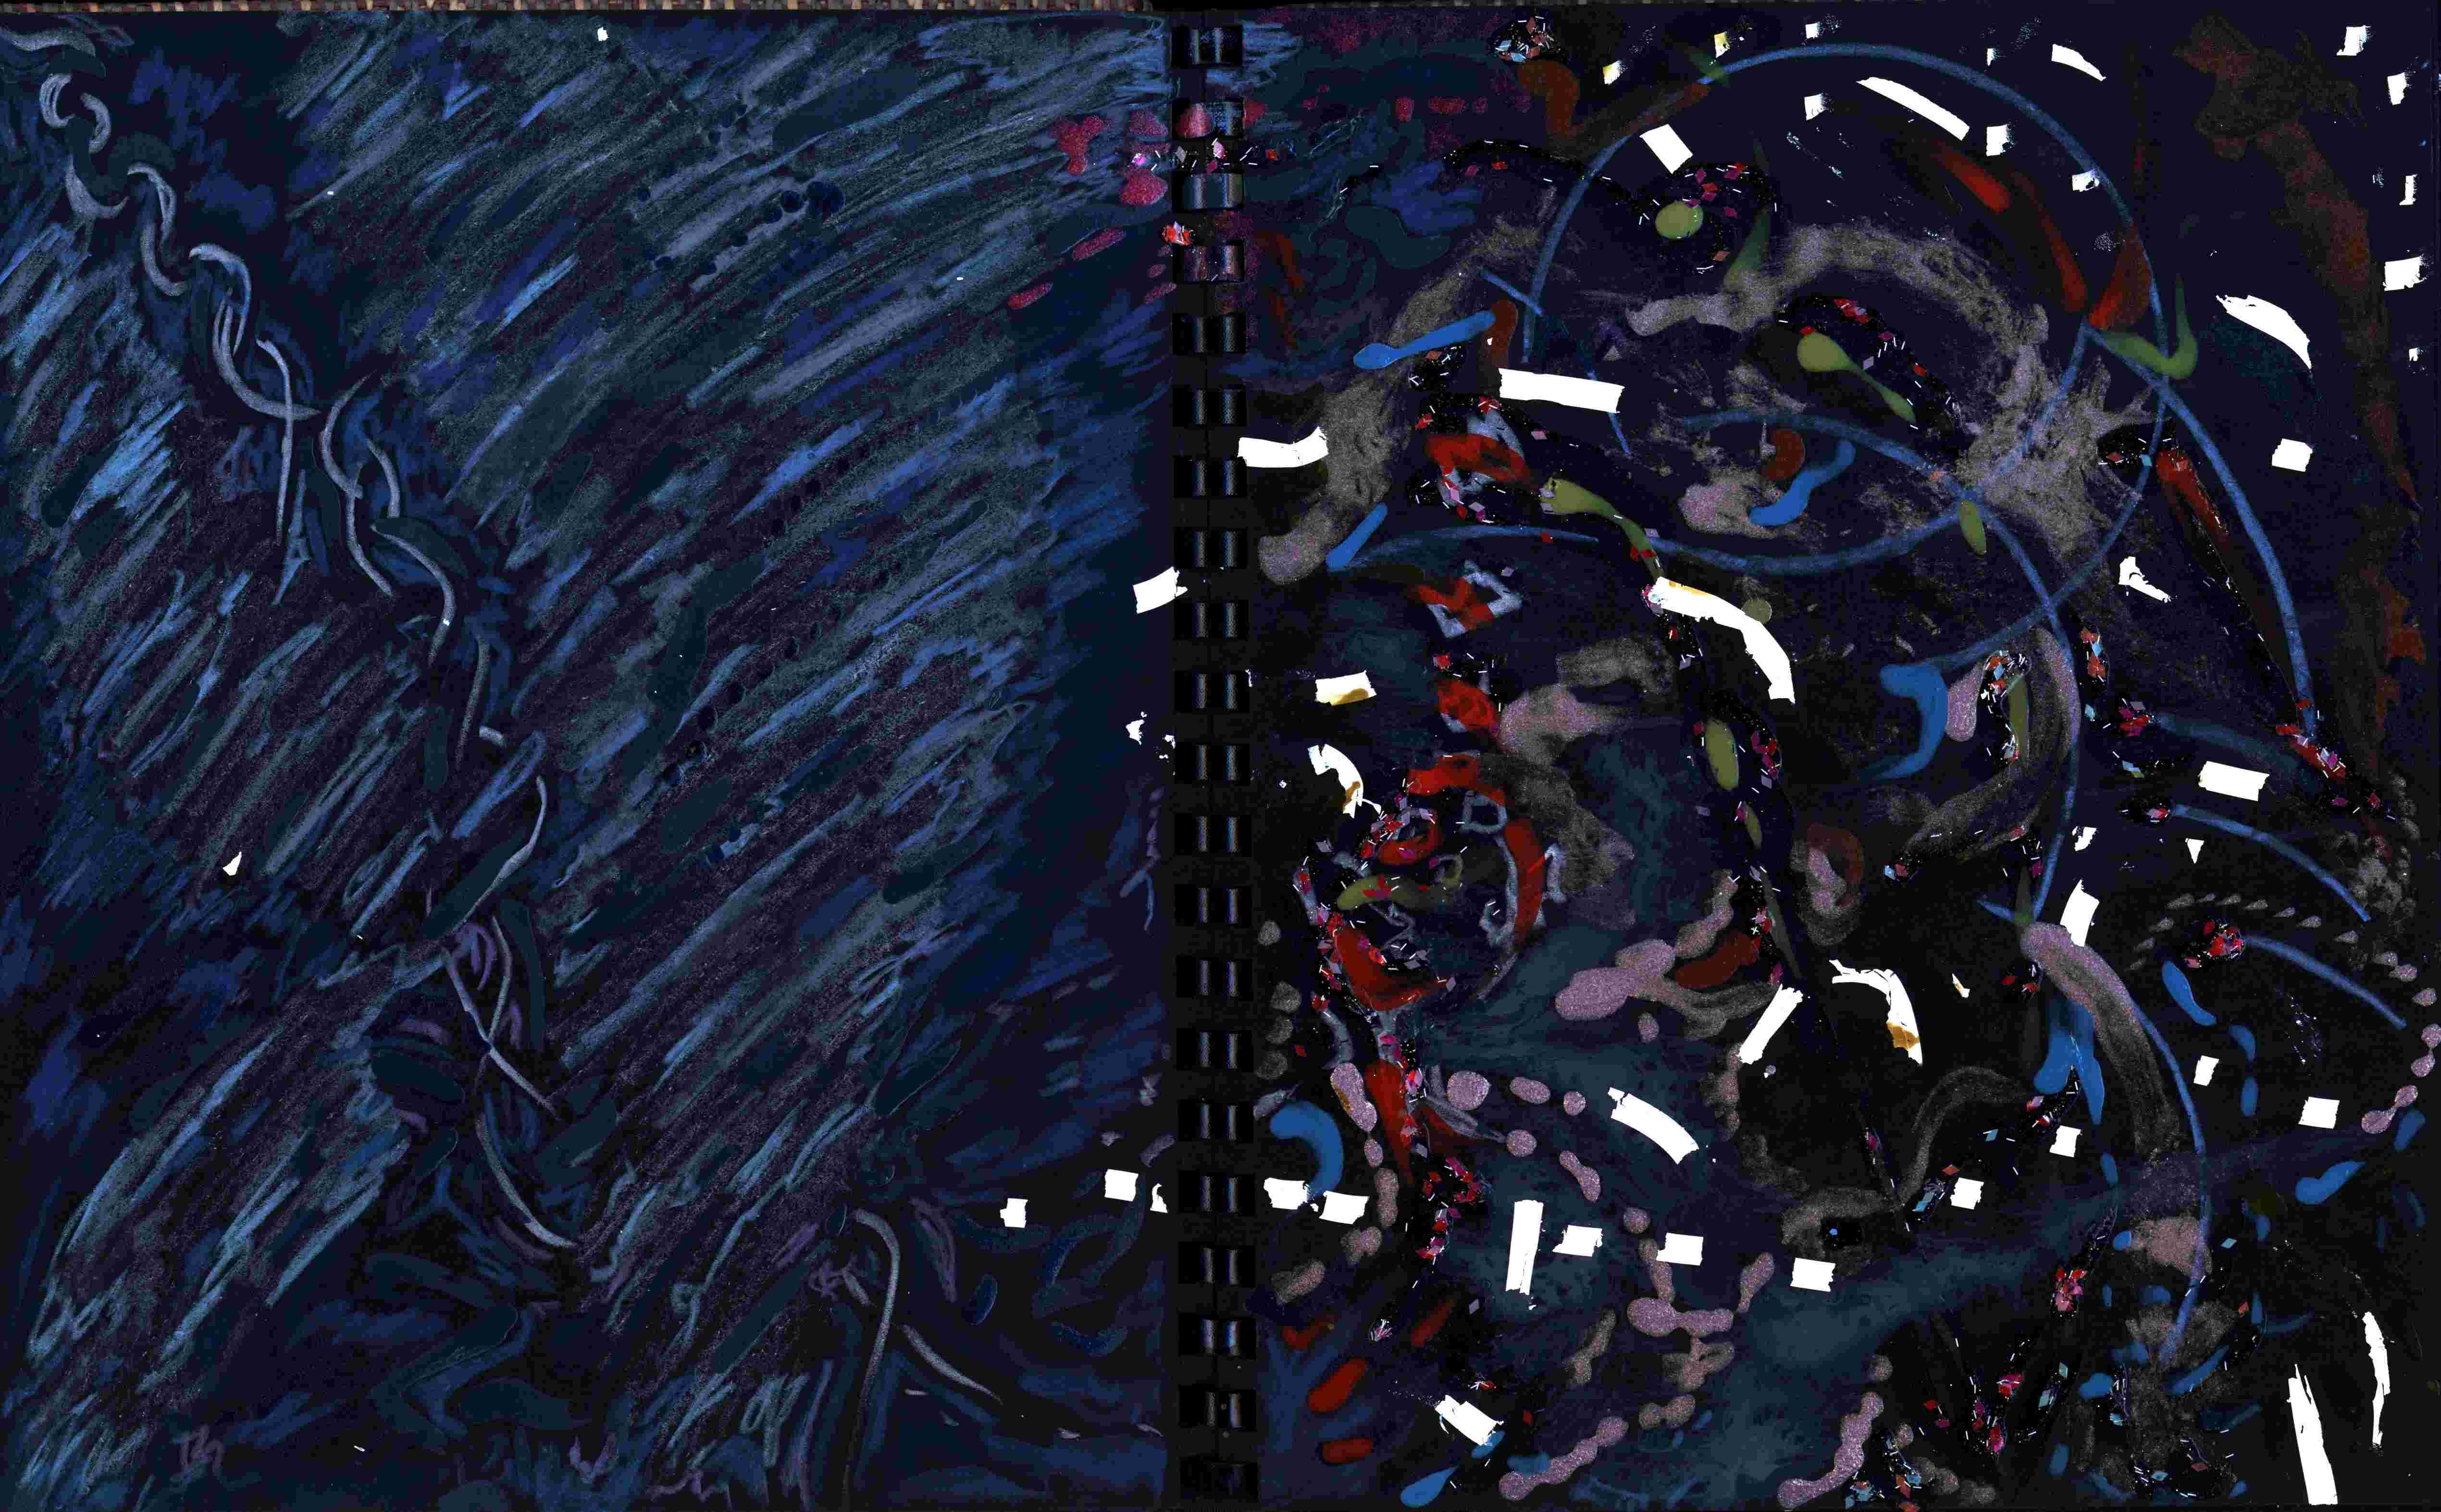 Three scanned artowrks with short strokes of paint, drawings, made with pencil, felt, acryillic paint, white out nail polish. The forms cascade into garden like constelations on a vlack background resembling the night time sky